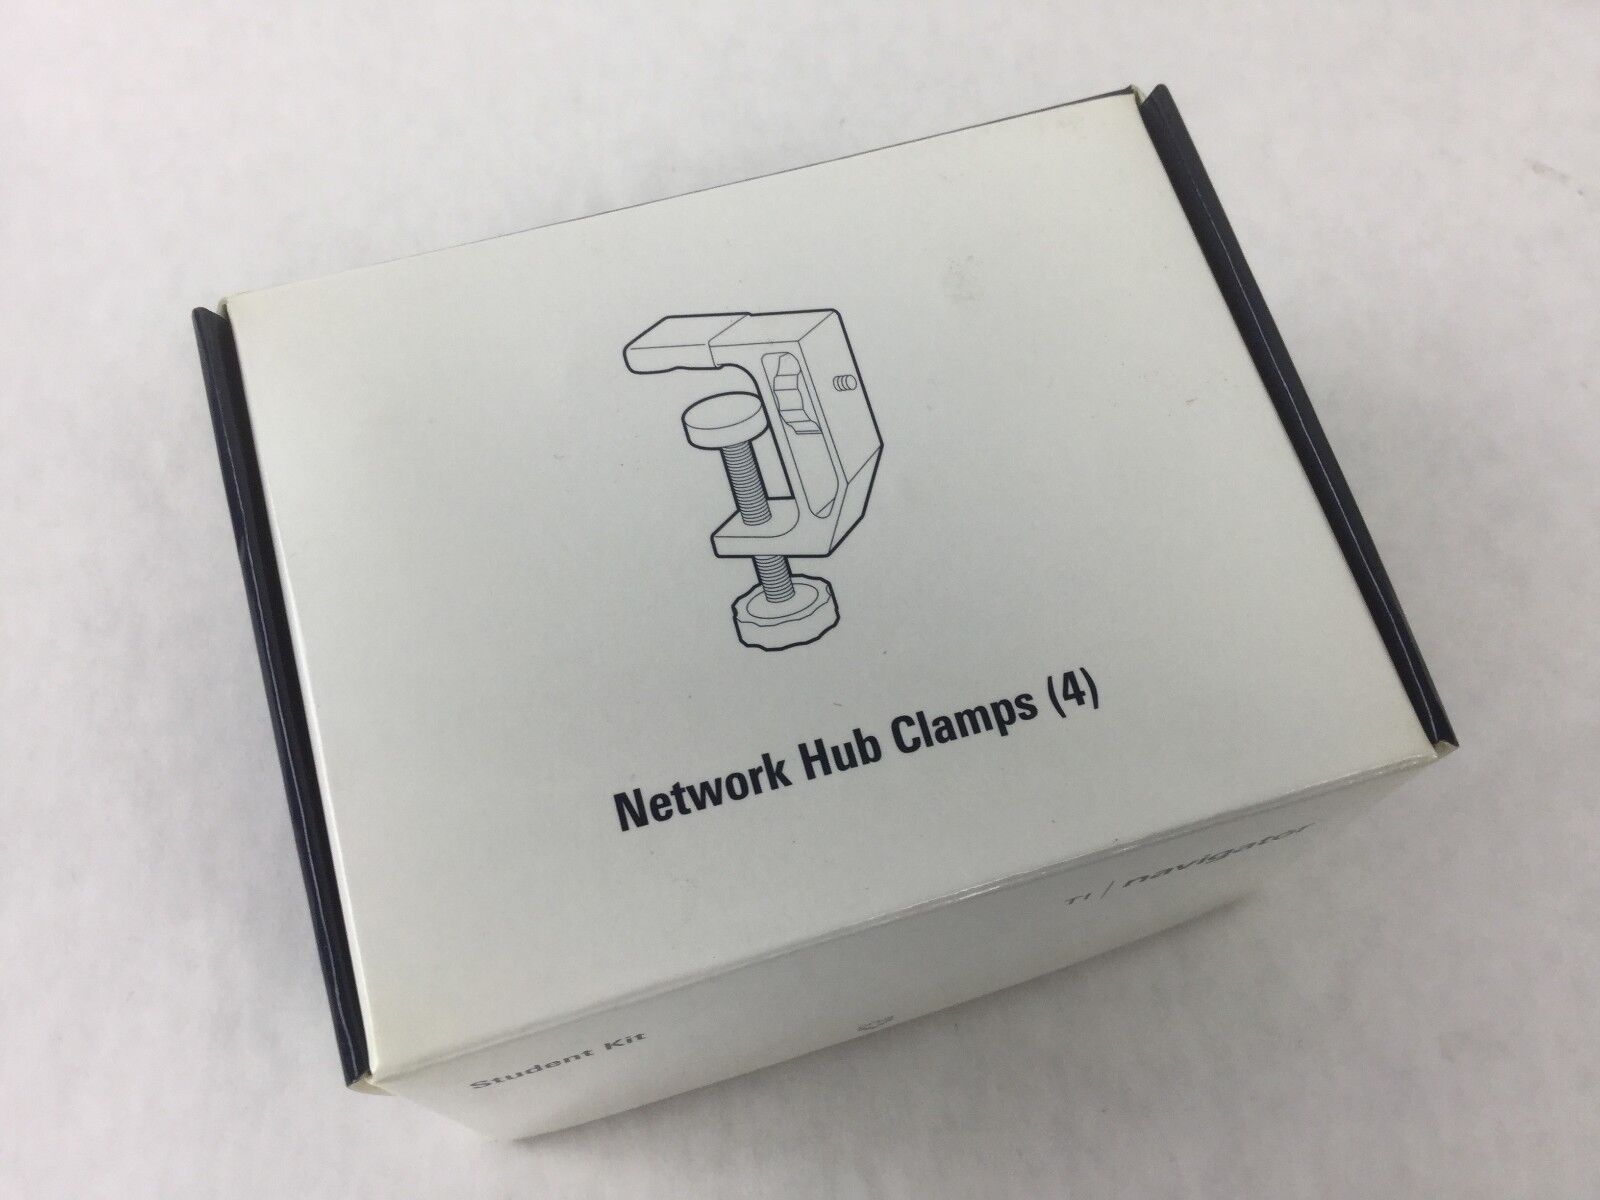 Texas Instruments TI-Navigator Network Hub clamps, NEW in BOX (Lot of 4)